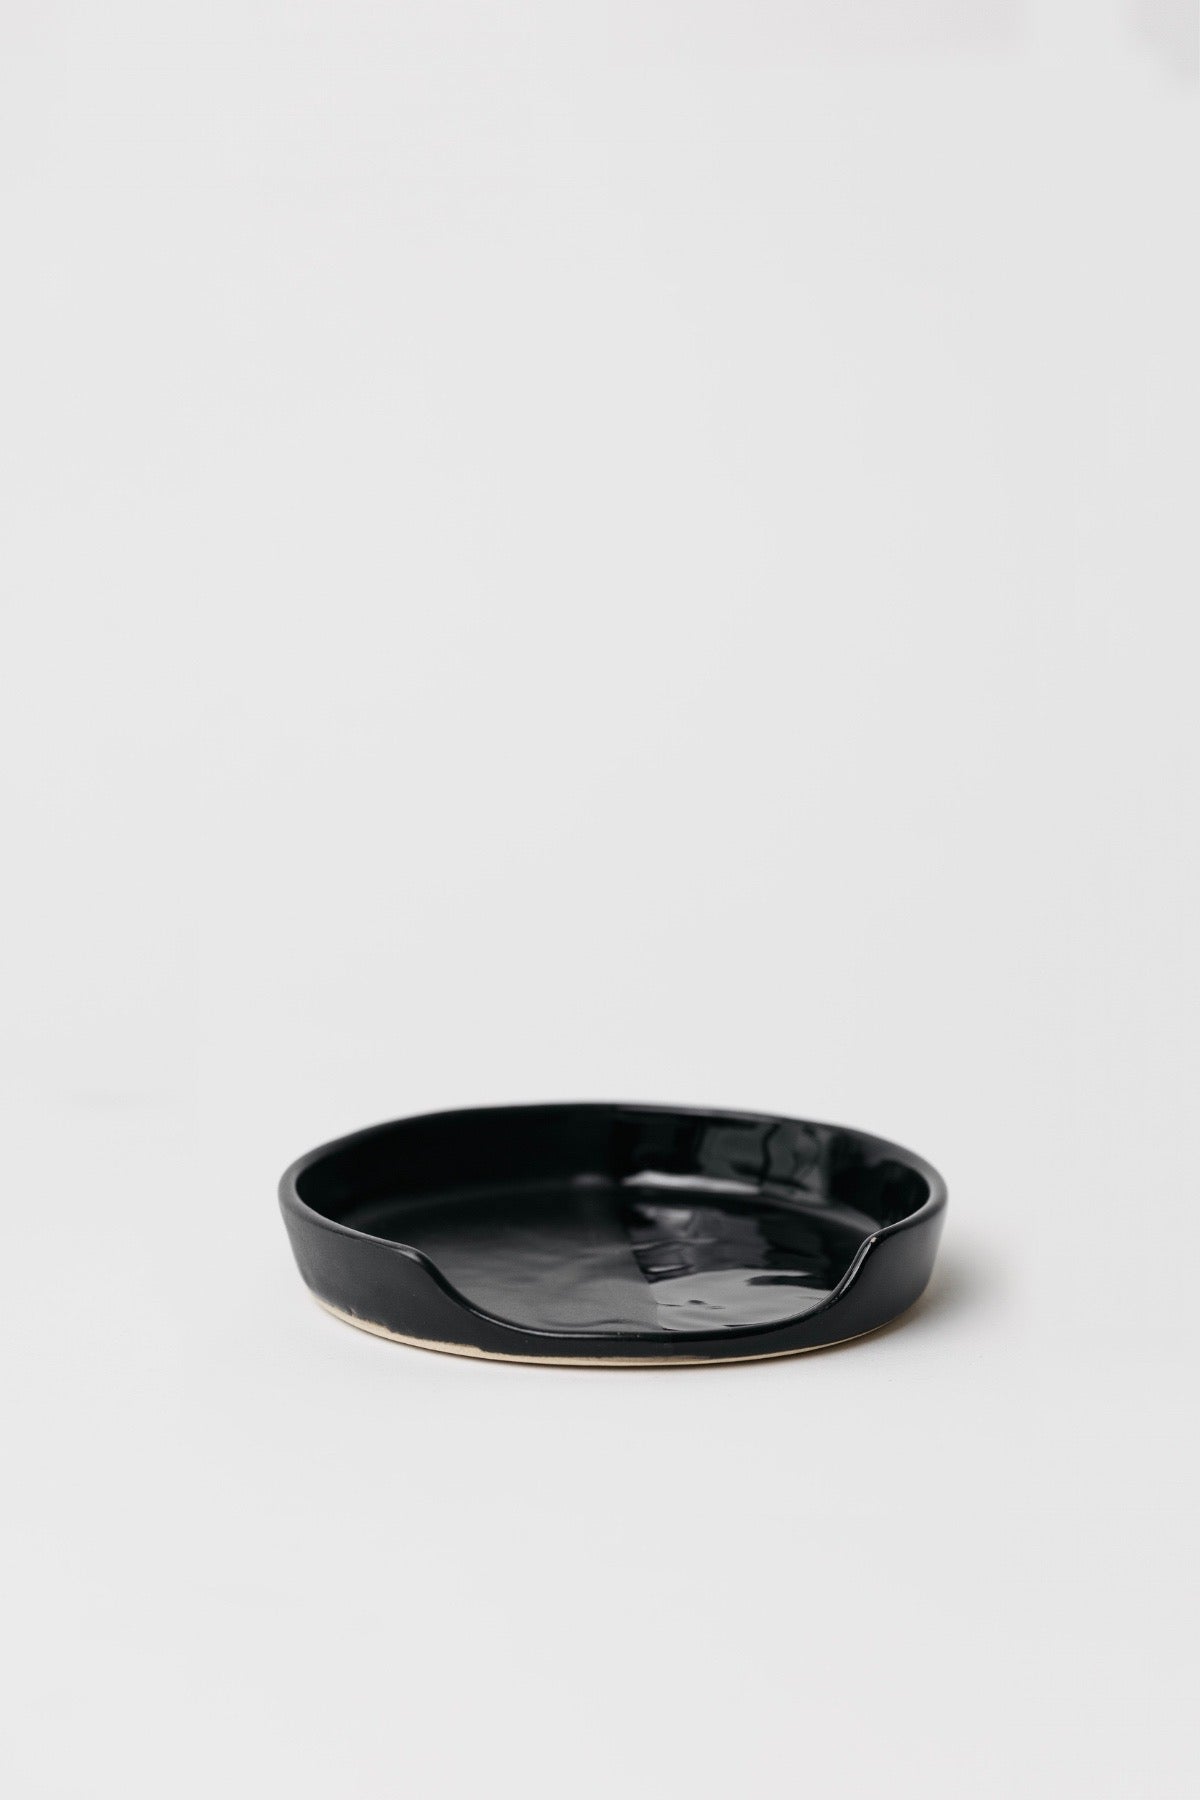 Sable Spoon Rest - Matte Black/Glossy Black - 4 inch